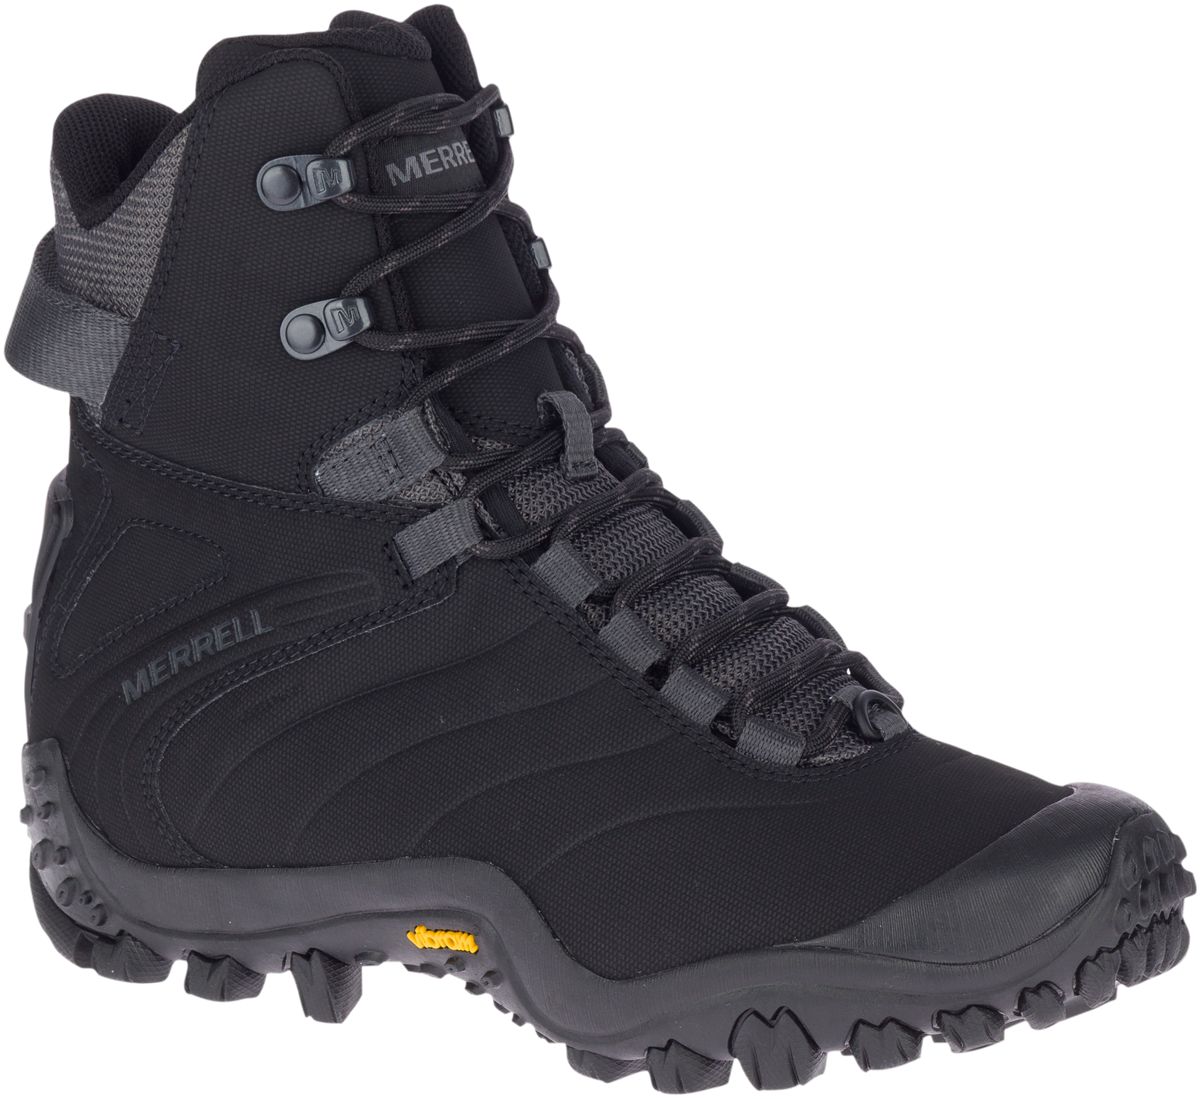 Chameleon Thermo 8 Tall Waterproof, Black/Rock, dynamic 2